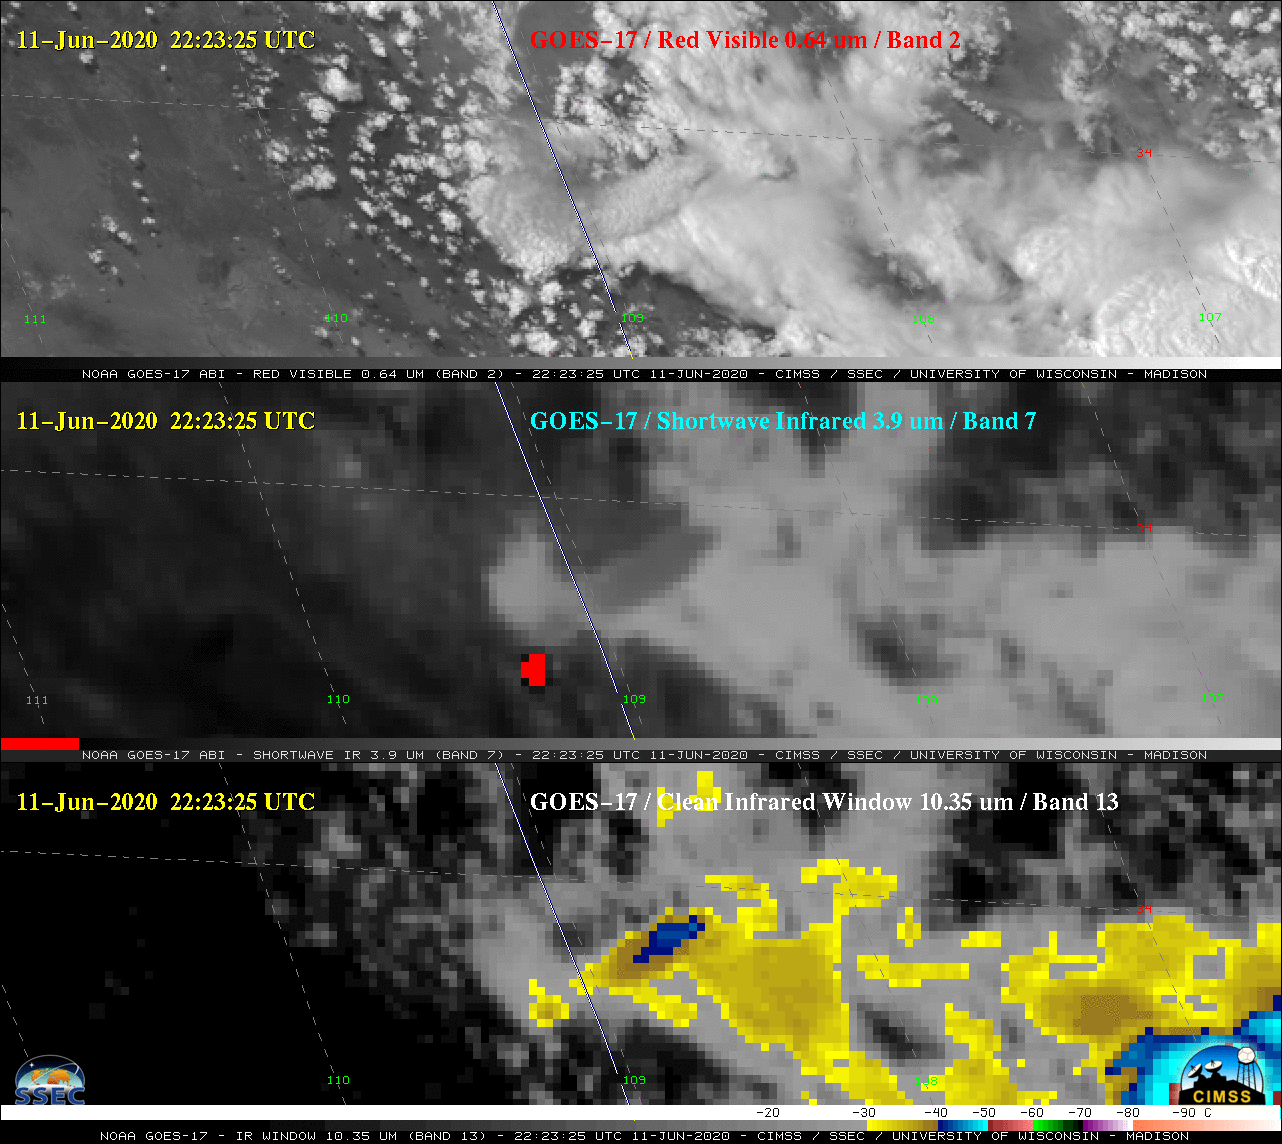 GOES-17 “Red” Visible (0.64 µm, top), Shortwave Infrared (3.9 µm, center) and “Clean” Infrared Window (10.35 µm, bottom) images, with hourly plots of surface reports [click to play animation | MP4]